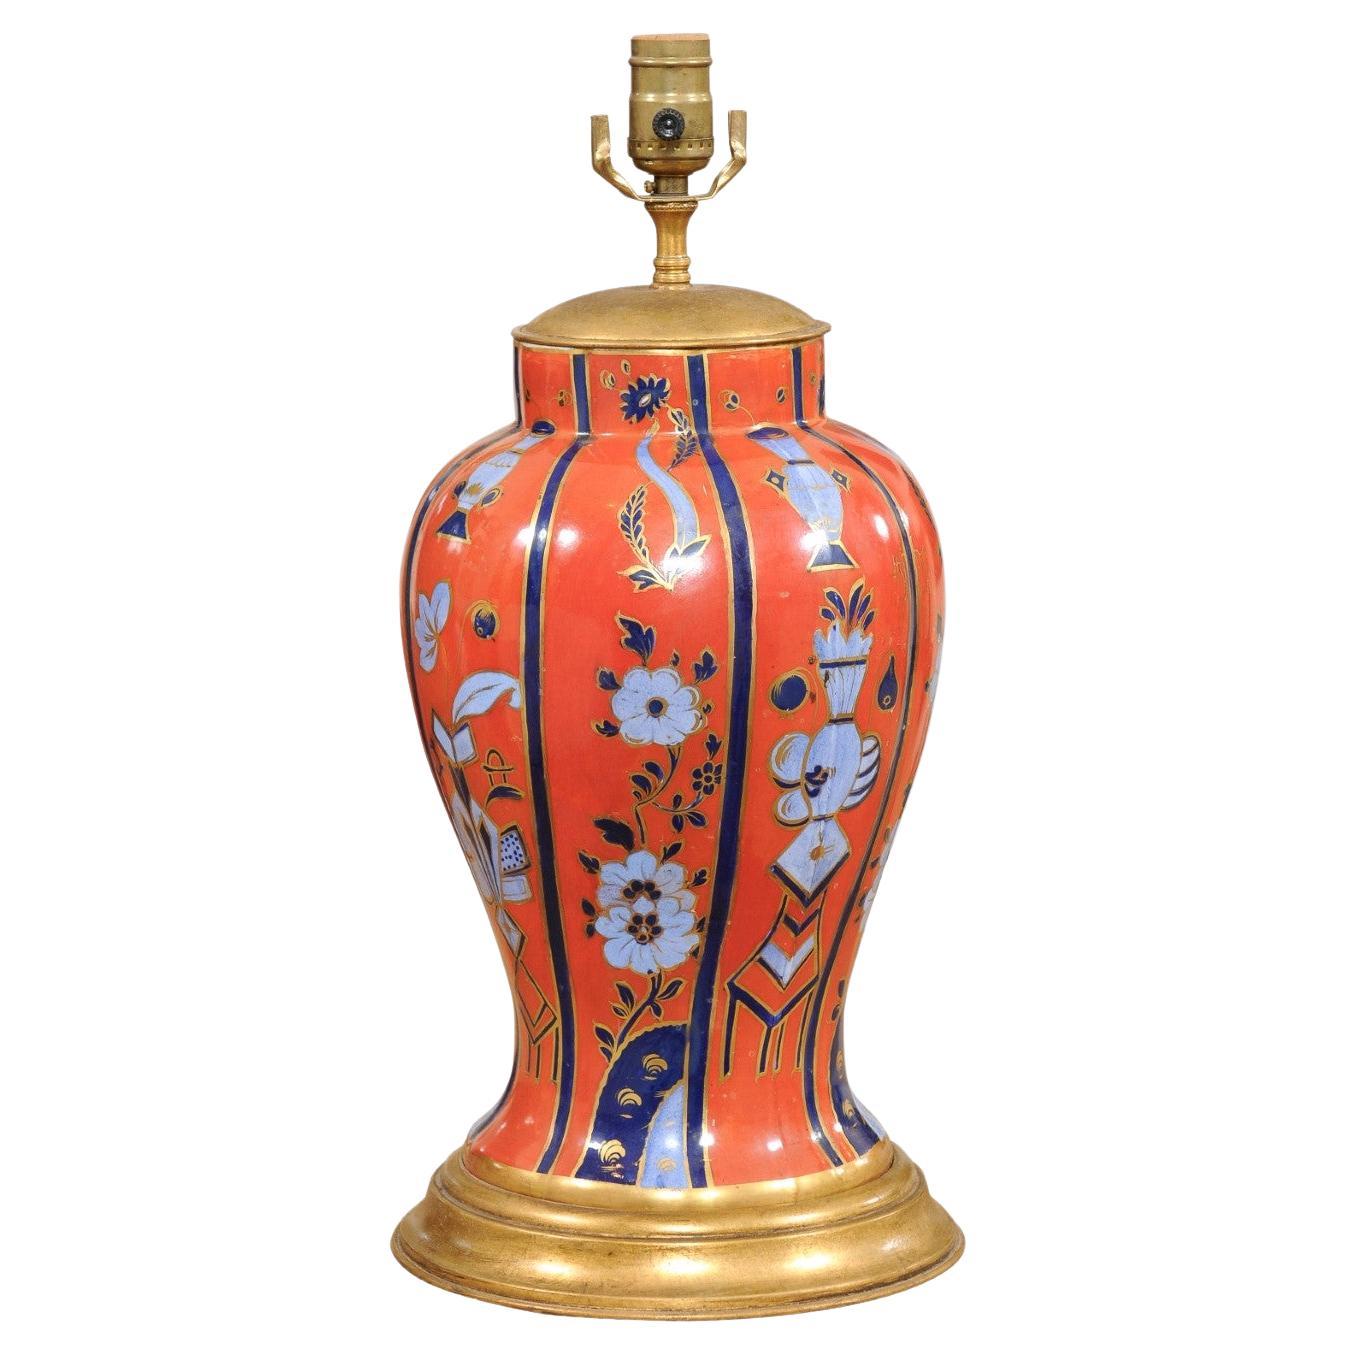 19th Century English Porcelain Vase in Orange & Blue, wired as a Lamp